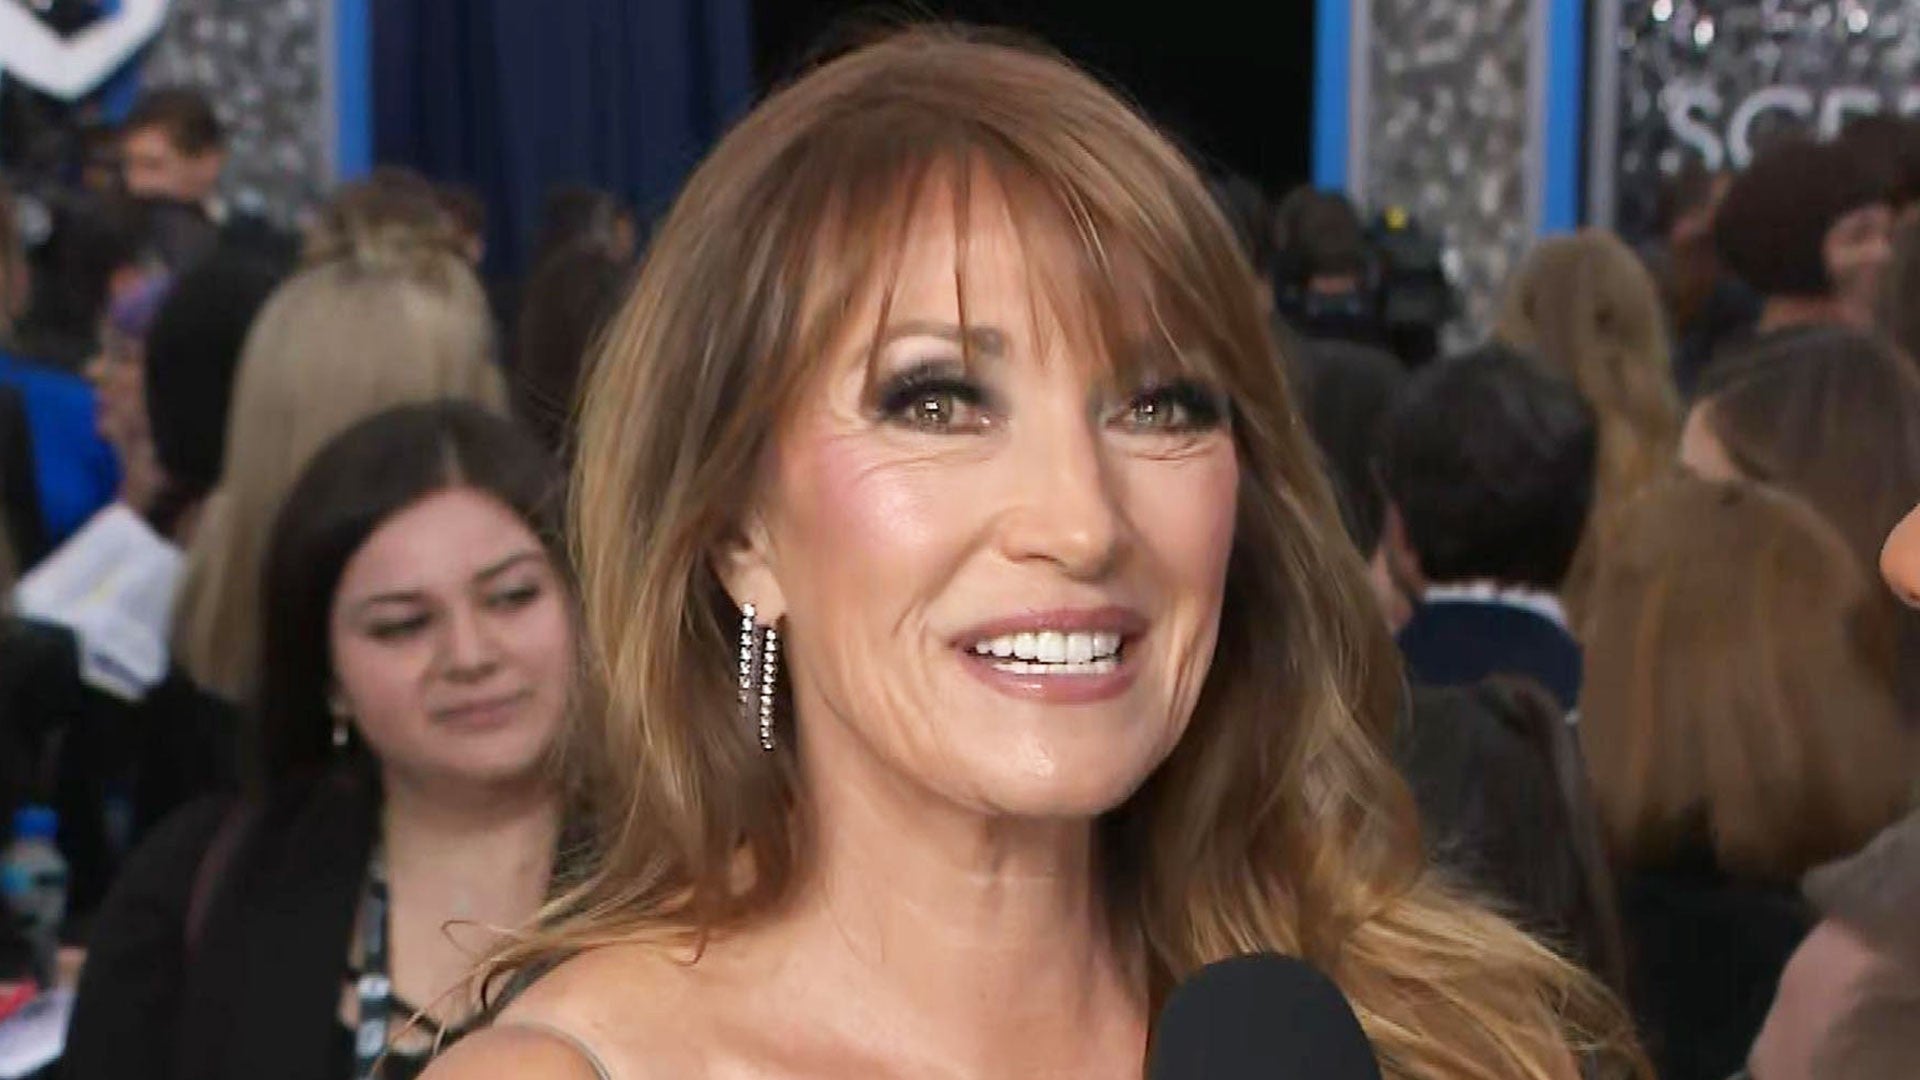 SAG Awards 2020: Jane Seymour on Weight Loss and 'Being Her Best Self'  (Exclusive)